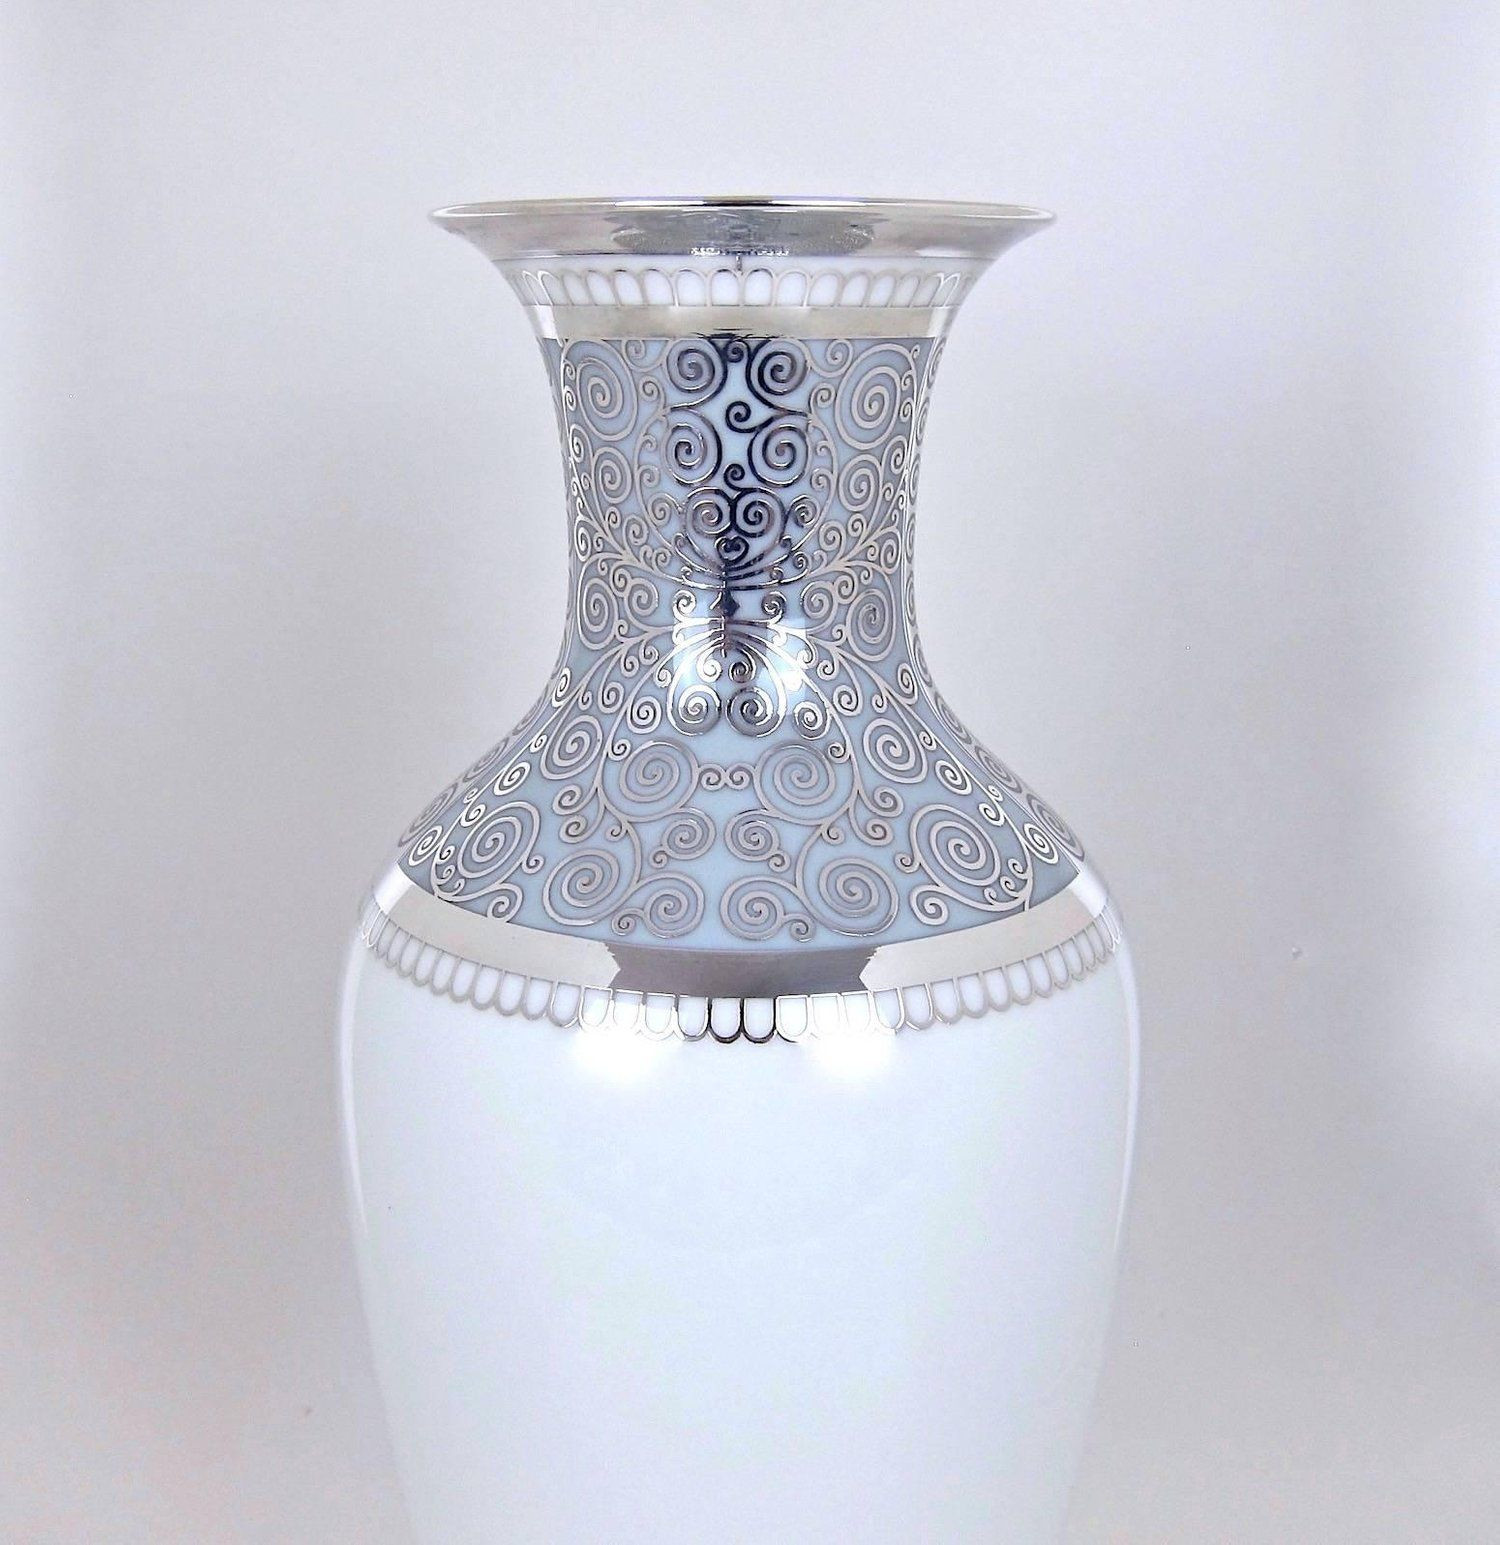 26 Spectacular Italian Pottery Vase 2023 free download italian pottery vase of 18 mid century glass vase the weekly world in 18 mid century glass vase